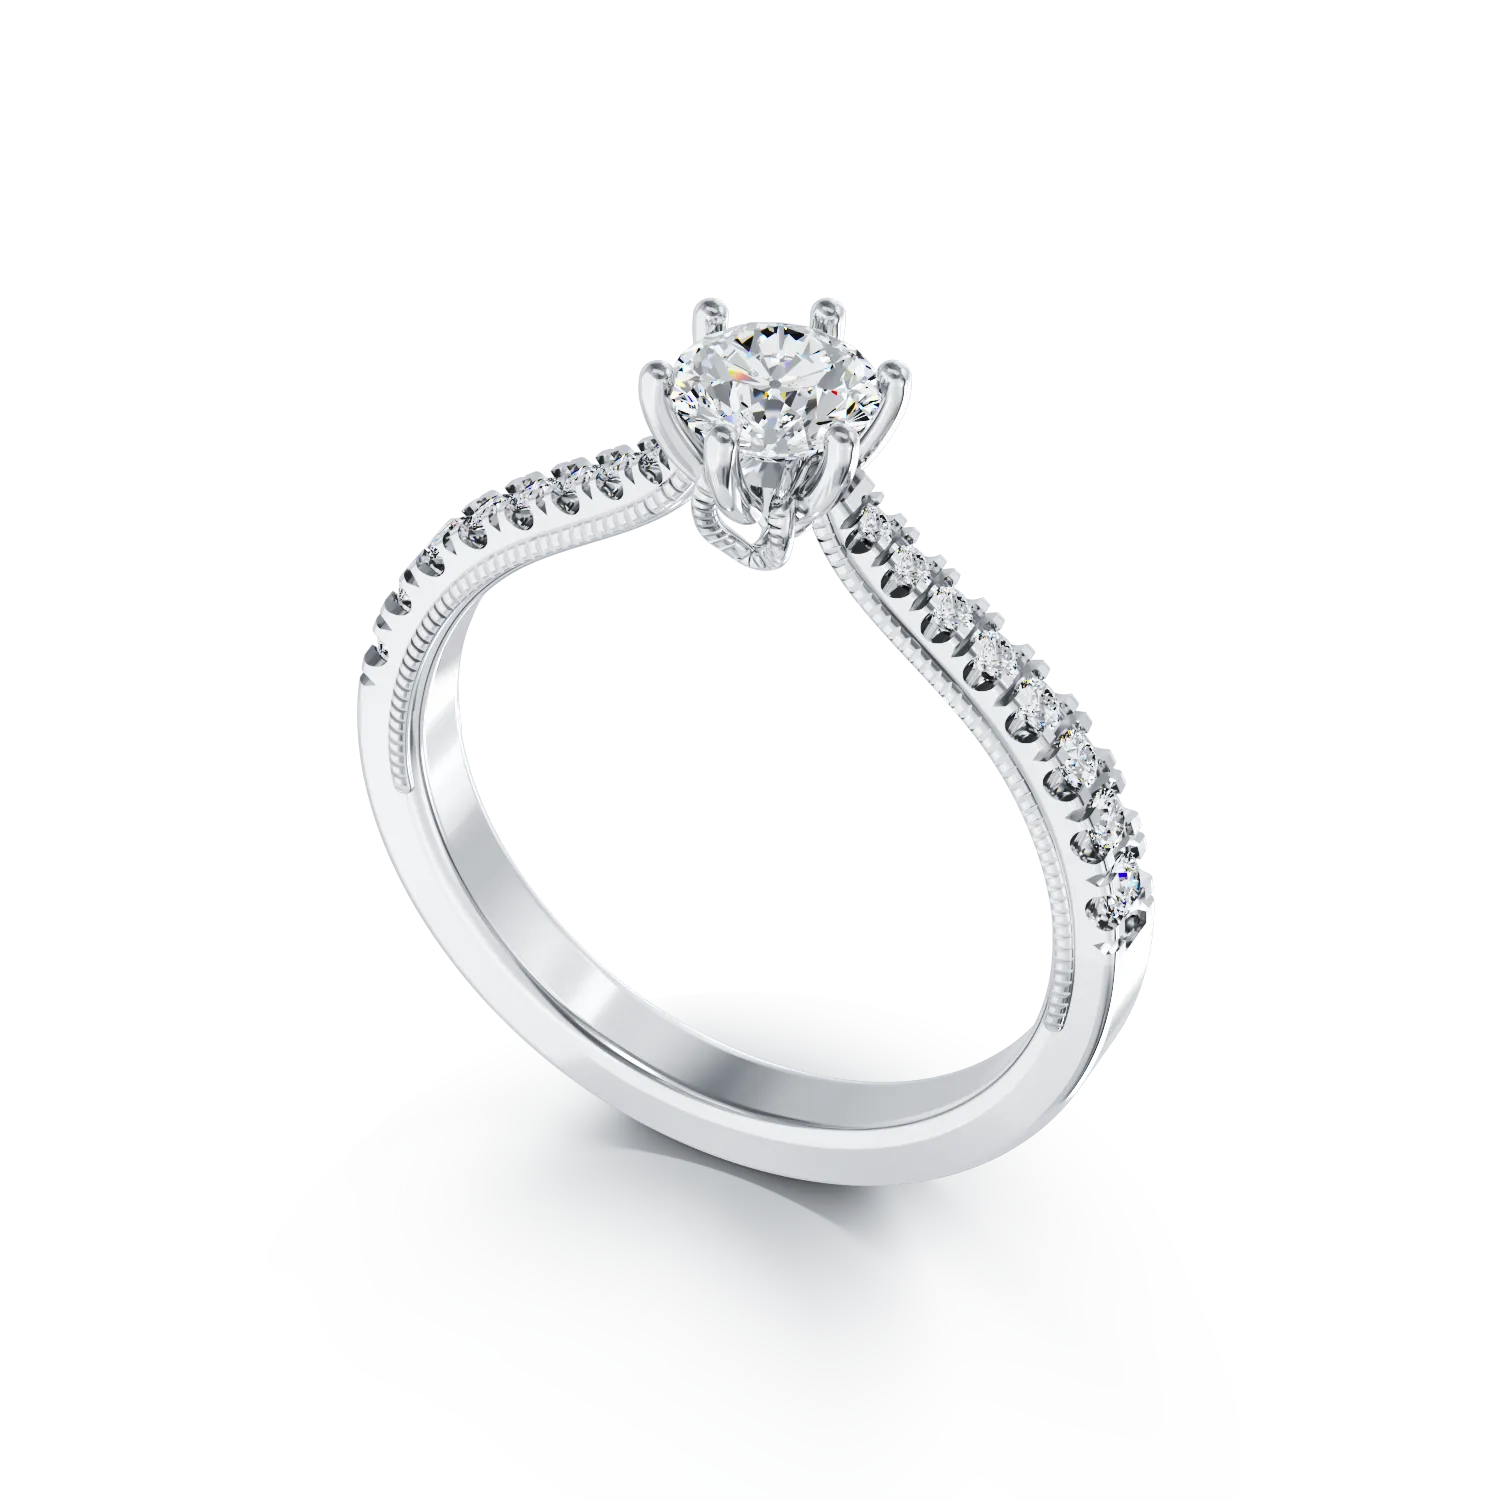 18K white gold engagement ring with 0.16ct diamond and 0.18ct diamonds